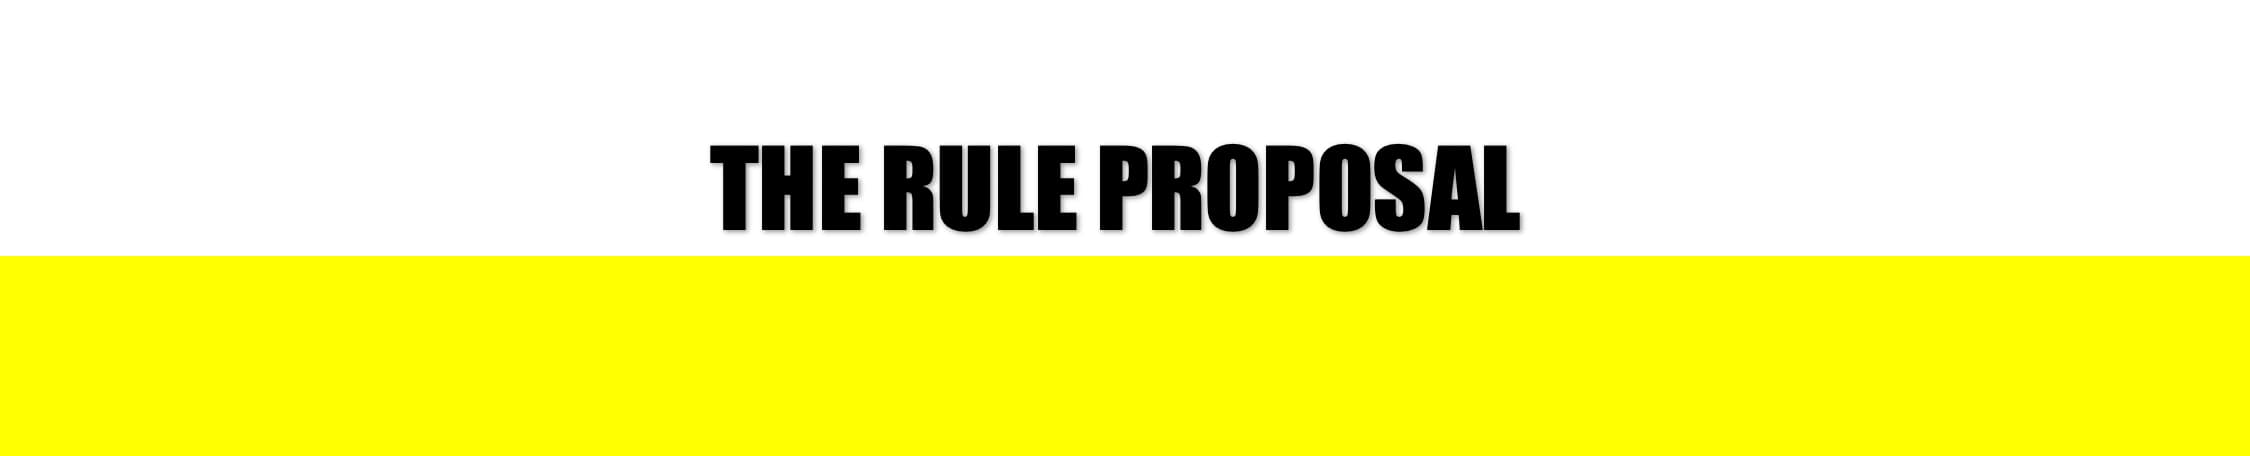 HEADER: THE RULE PROPOSAL